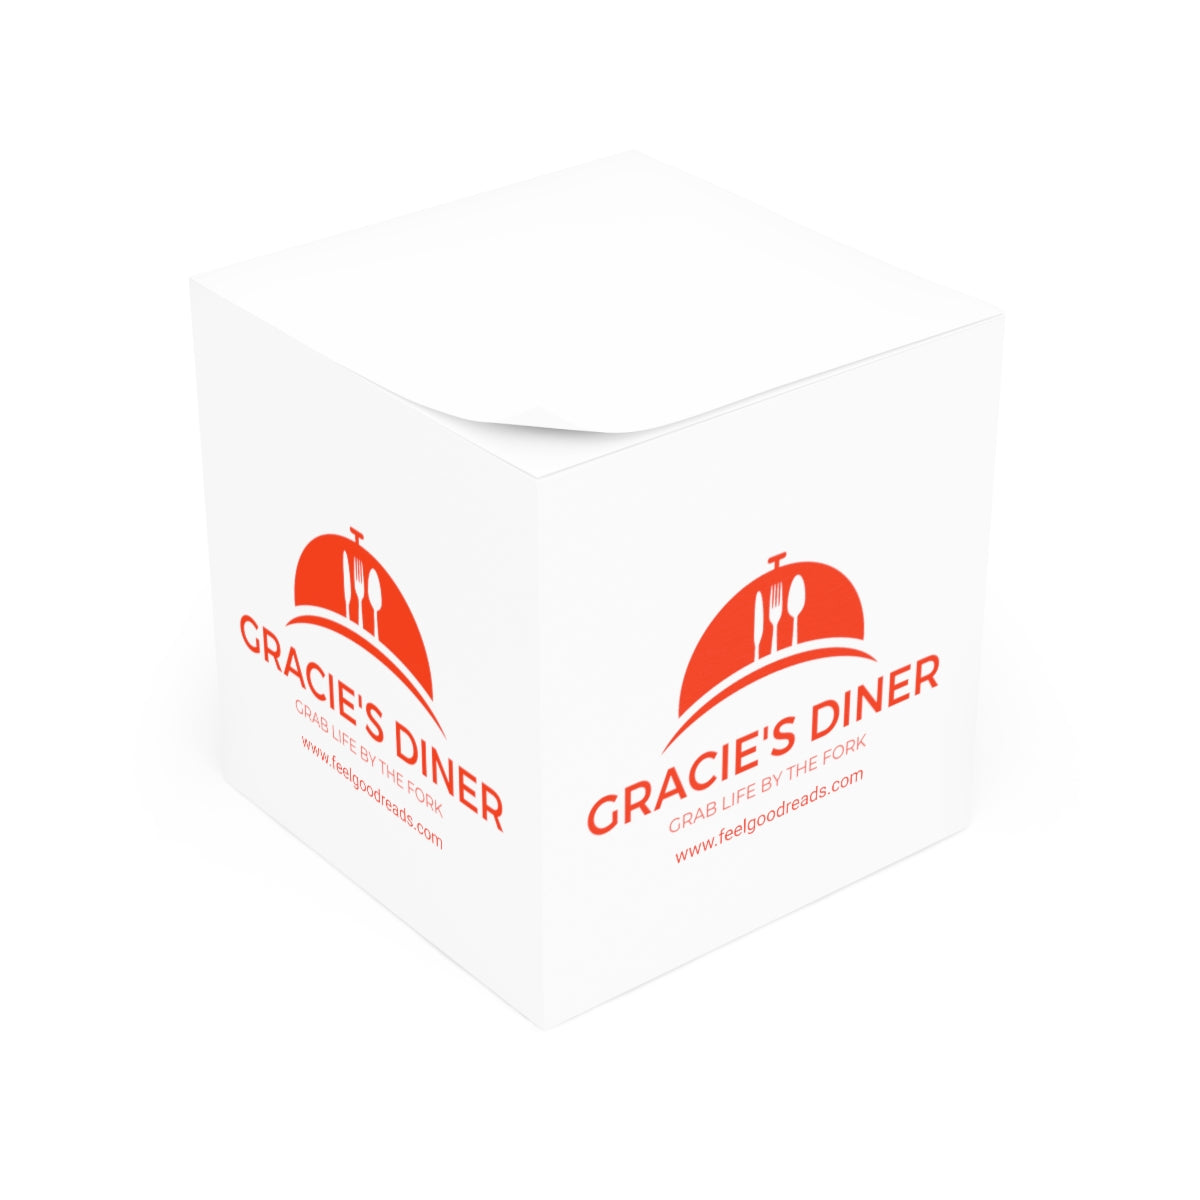 Gracie's Diner Note Cube